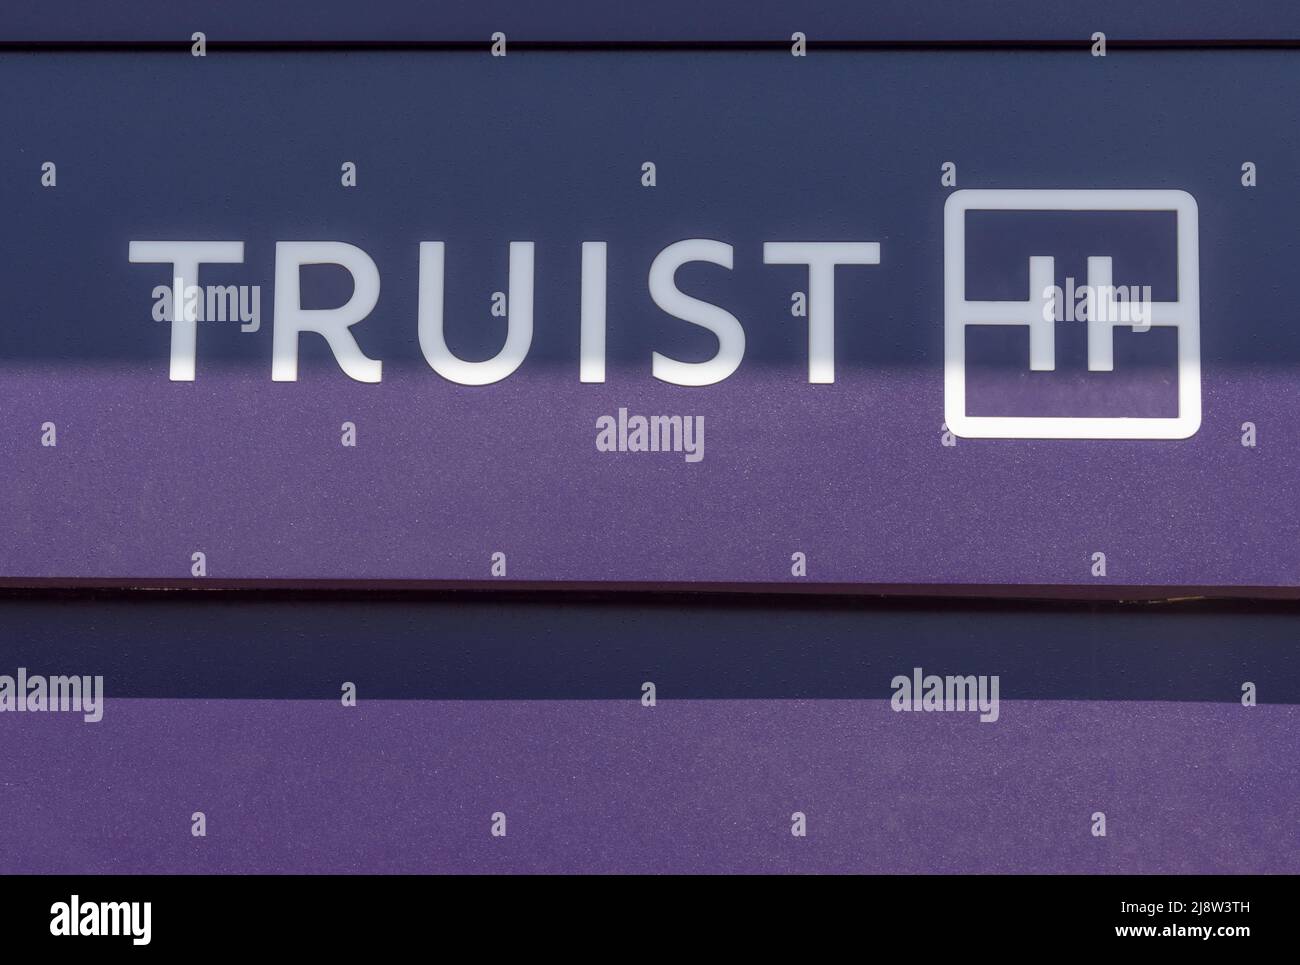 Truist brand hires stock photography and images Alamy